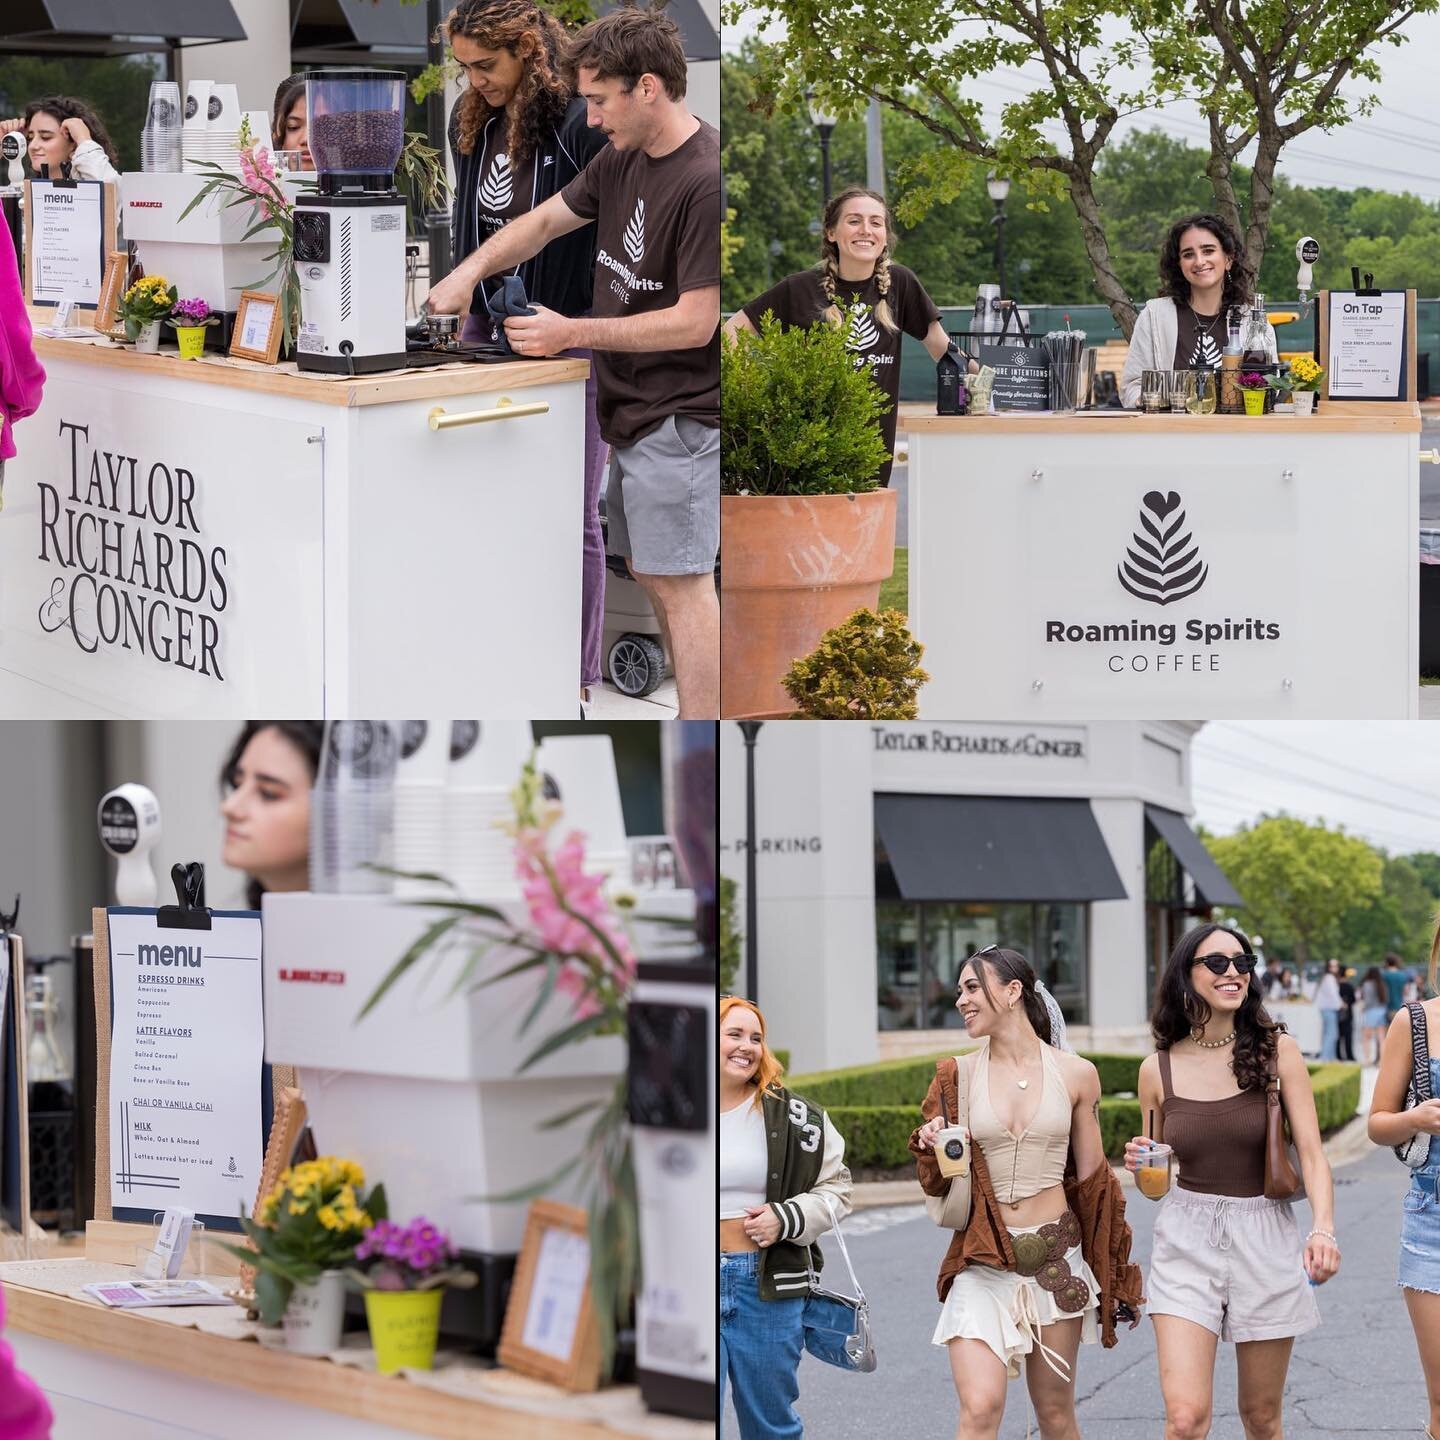 Reliving the moments from the Phillips Place Spring Market &amp; Shopping Stroll ☕️🌸🛍️ Sip, stroll, shop, repeat! The brew crew kept the crowd energized &amp; the caffeine flowing! Such a wonderful way to spend a spring Saturday! 📷 by @tristinnico